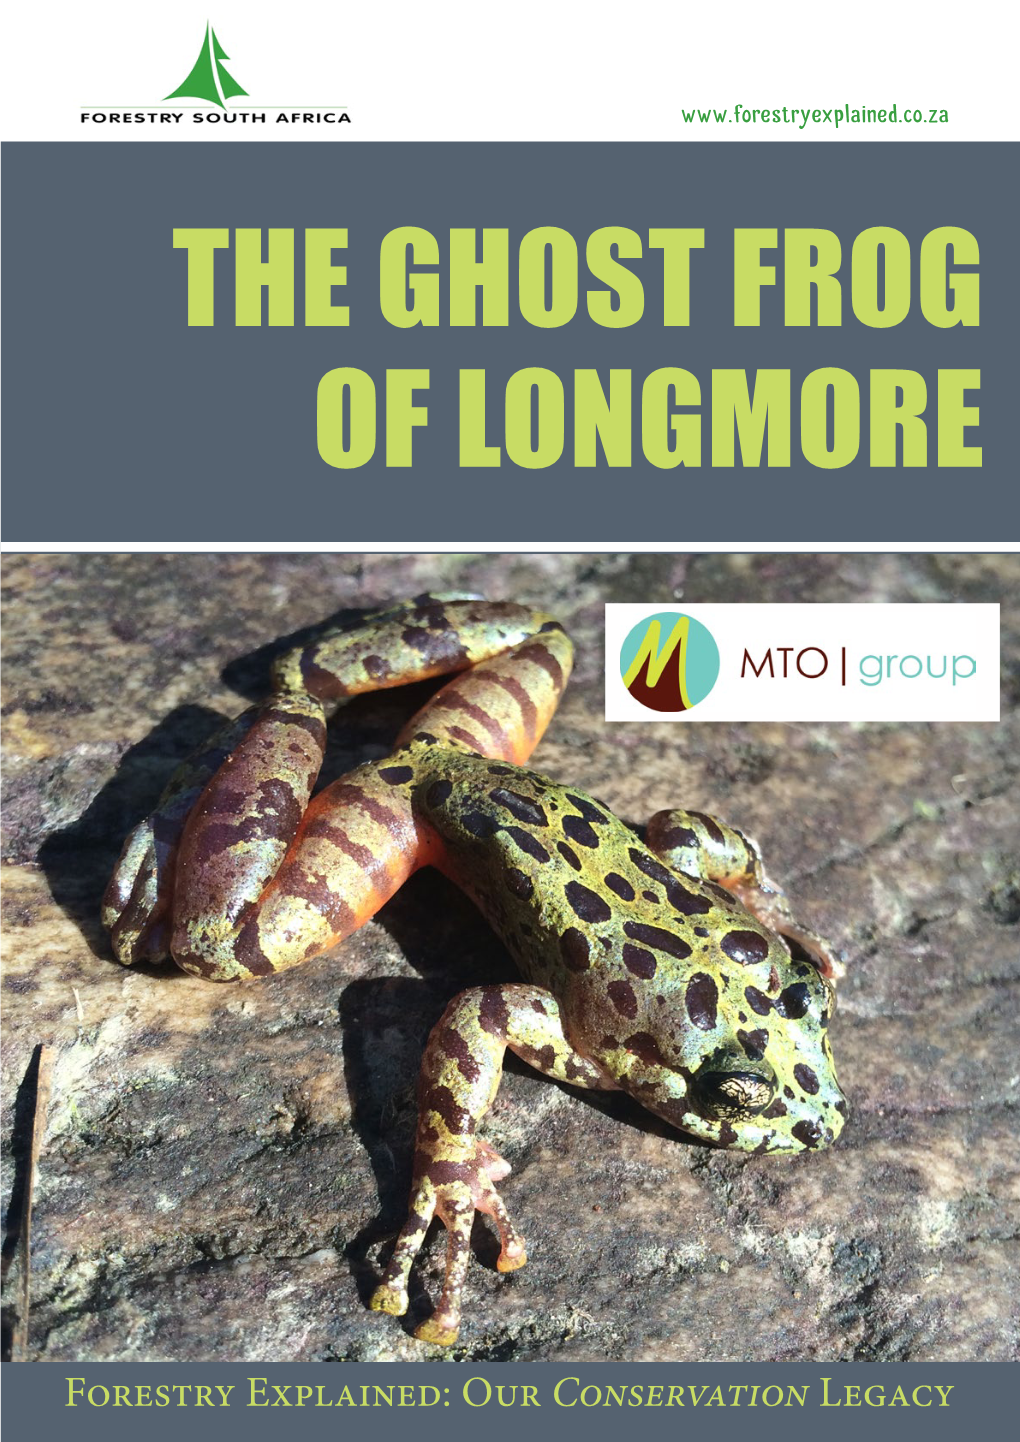 The Ghost Frog of Longmore